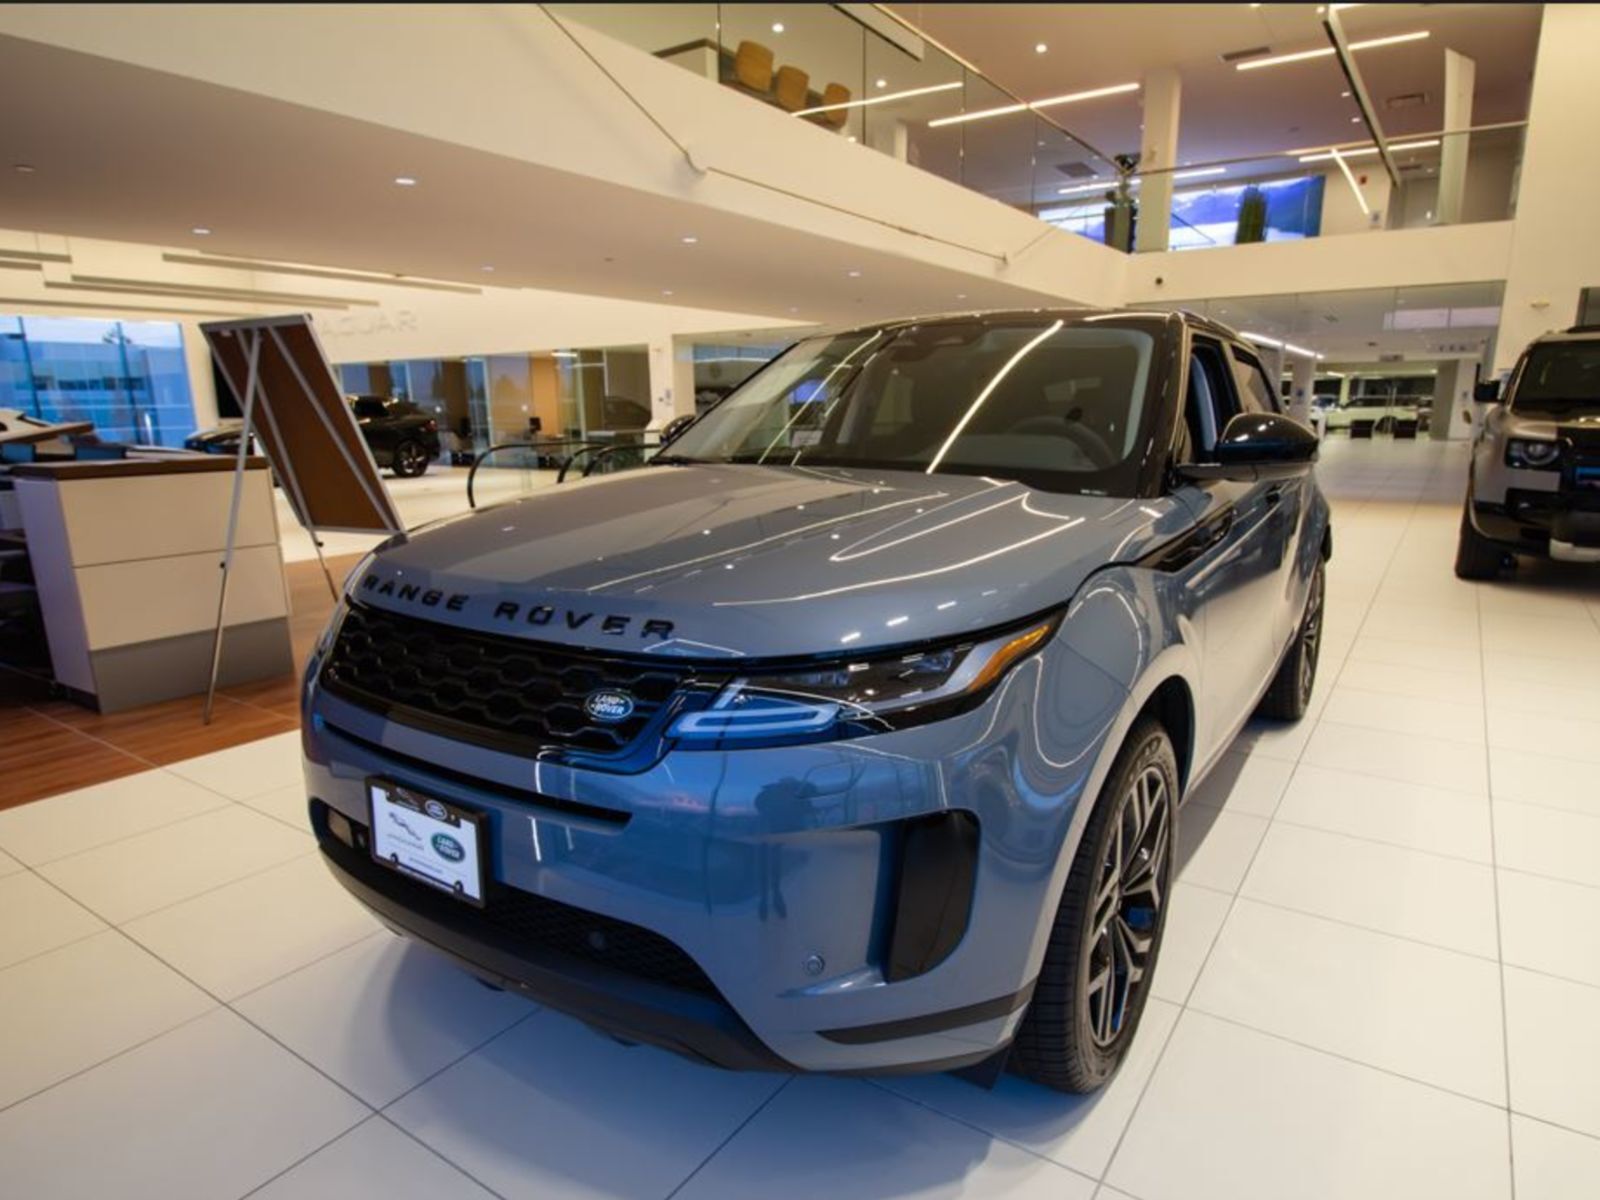 2023 Land Rover Range Rover Evoque S | Black Exterior Pack | Fixed Panoramic Roof | C